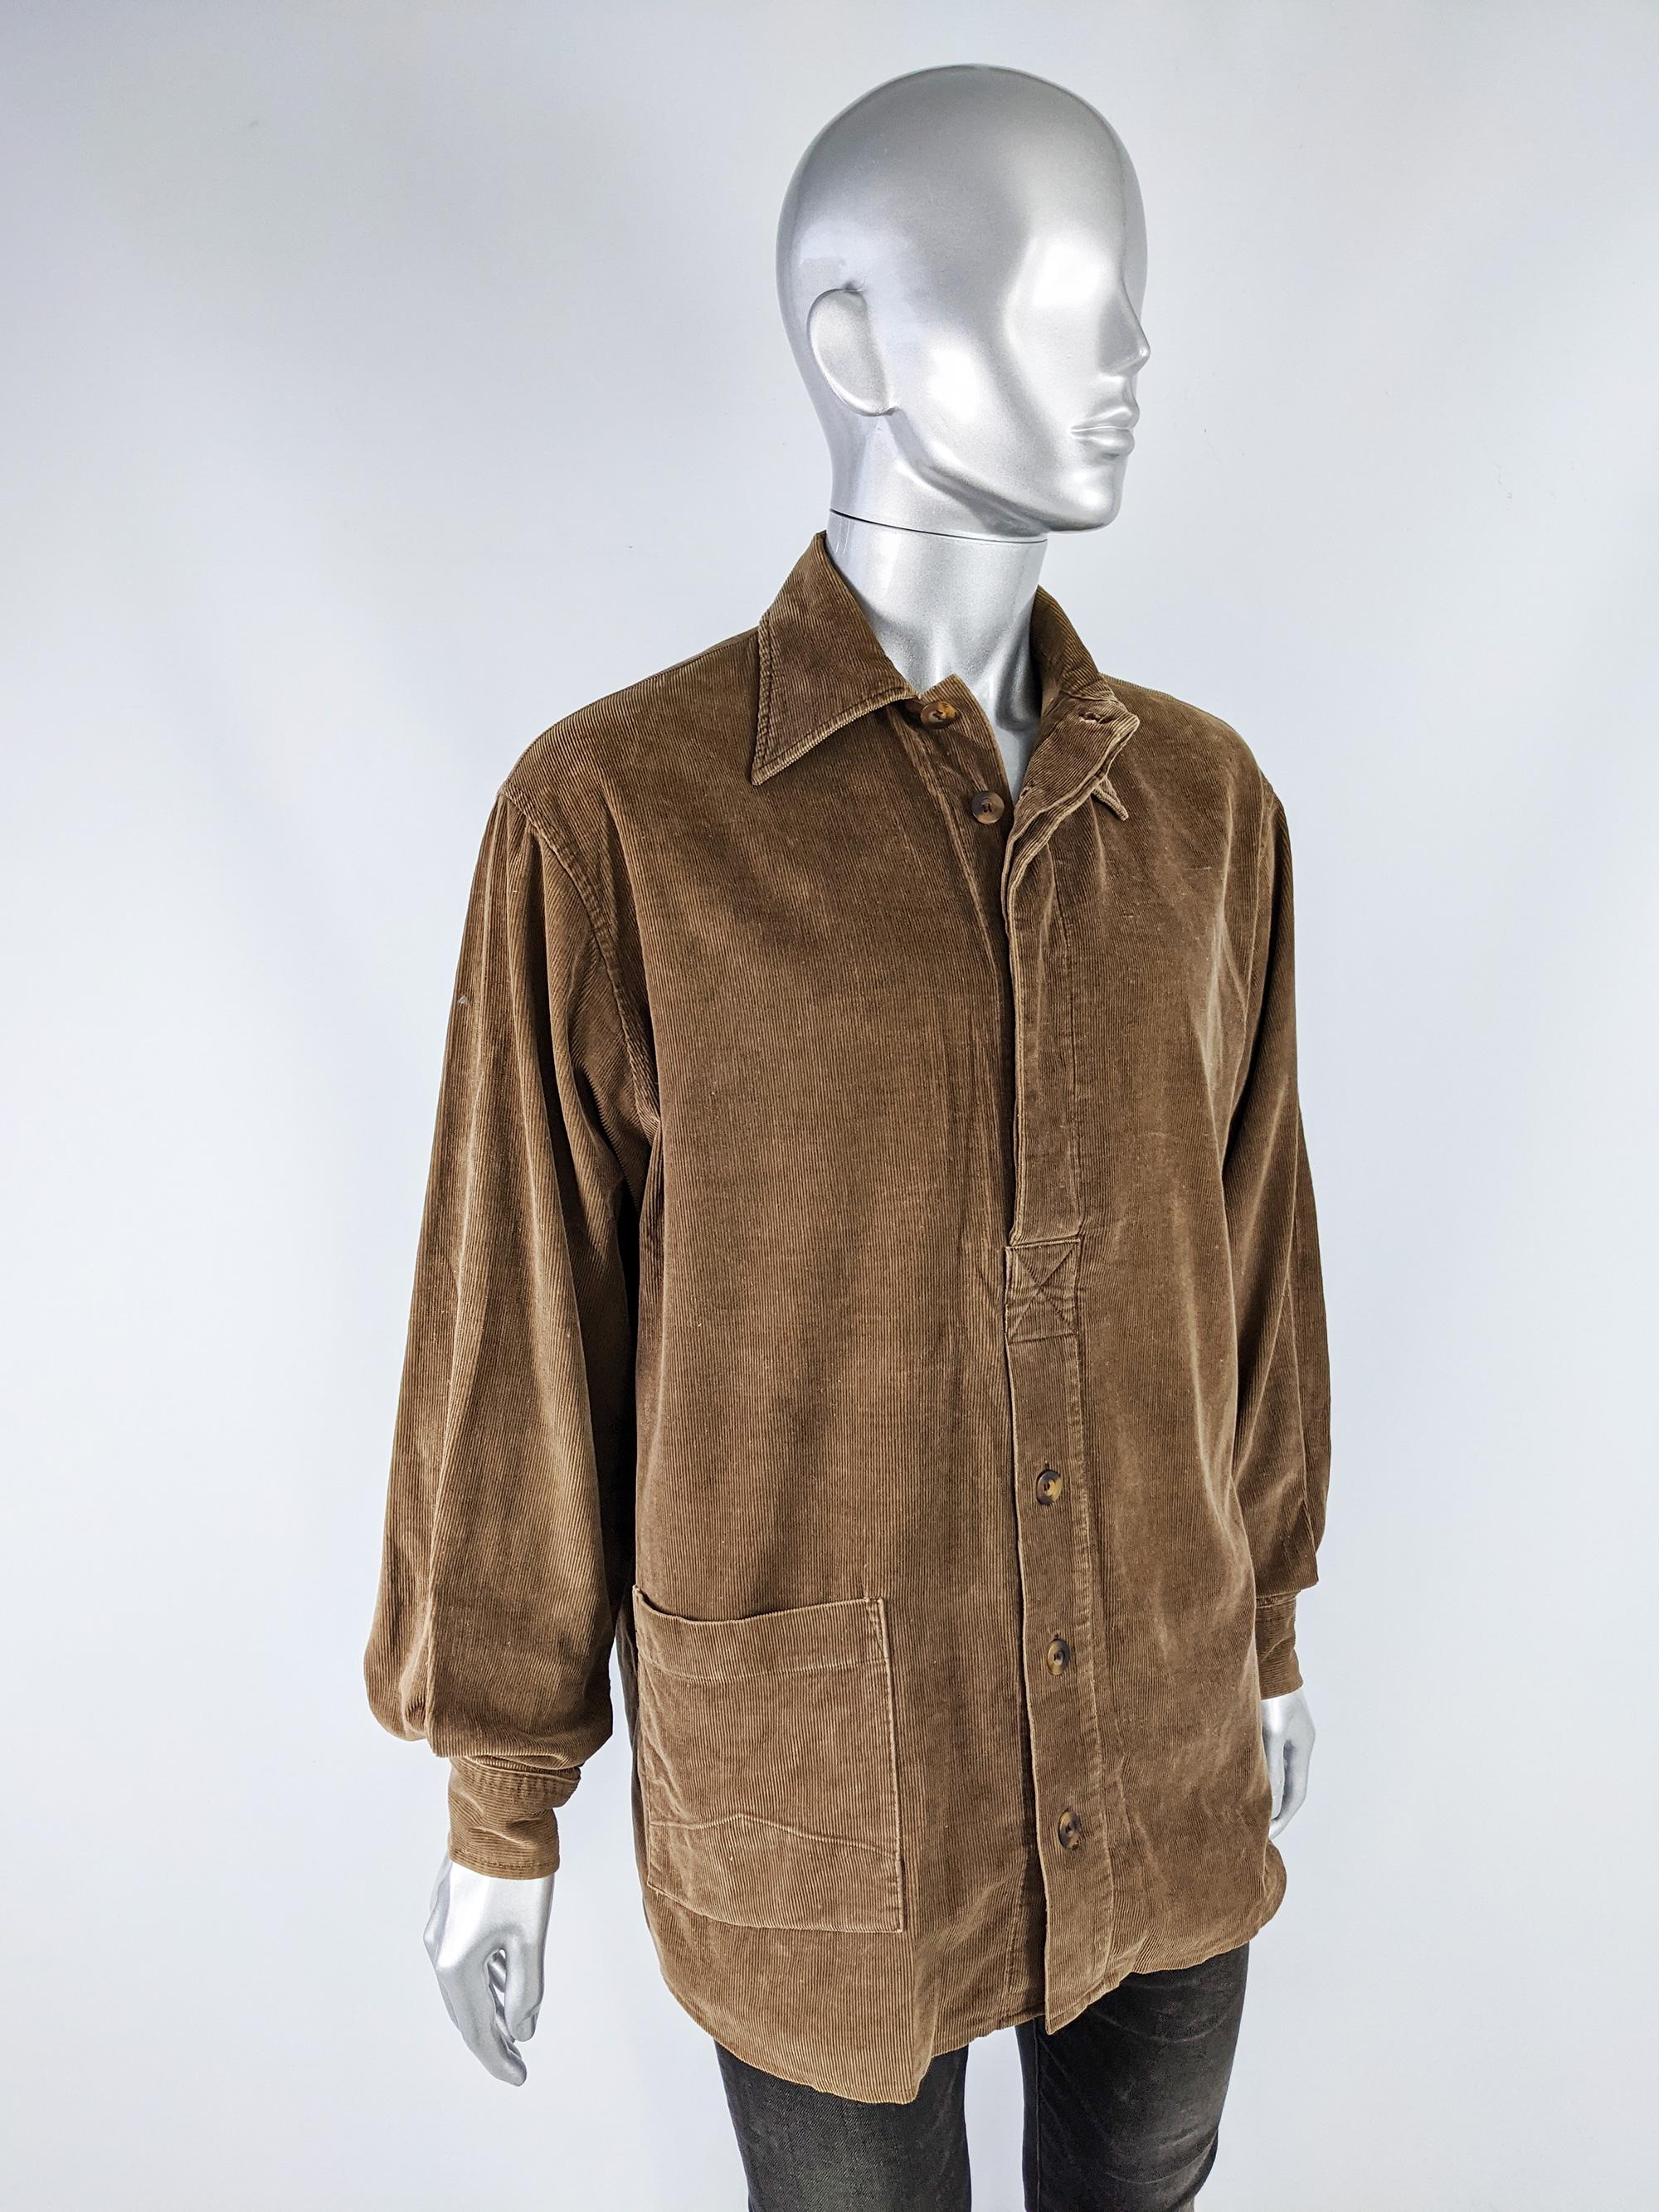 Joe Casely Hayford Vintage Brown Cord Shirt, 1990s For Sale 1